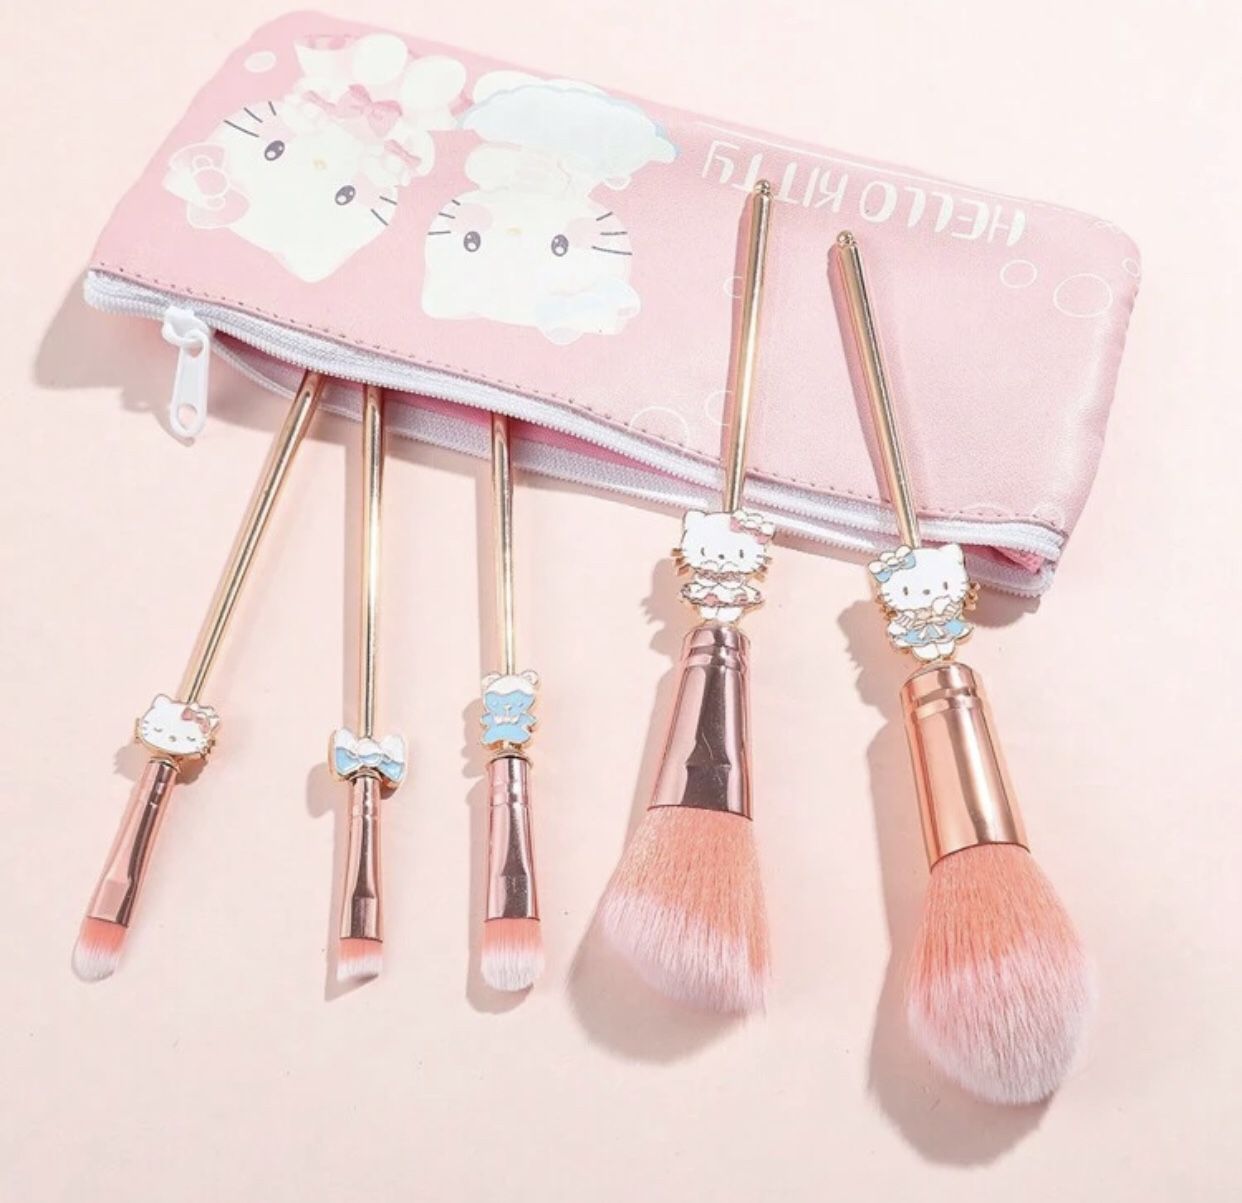 Hello Kitty Makeup Brushes & Mirror $25 For All New